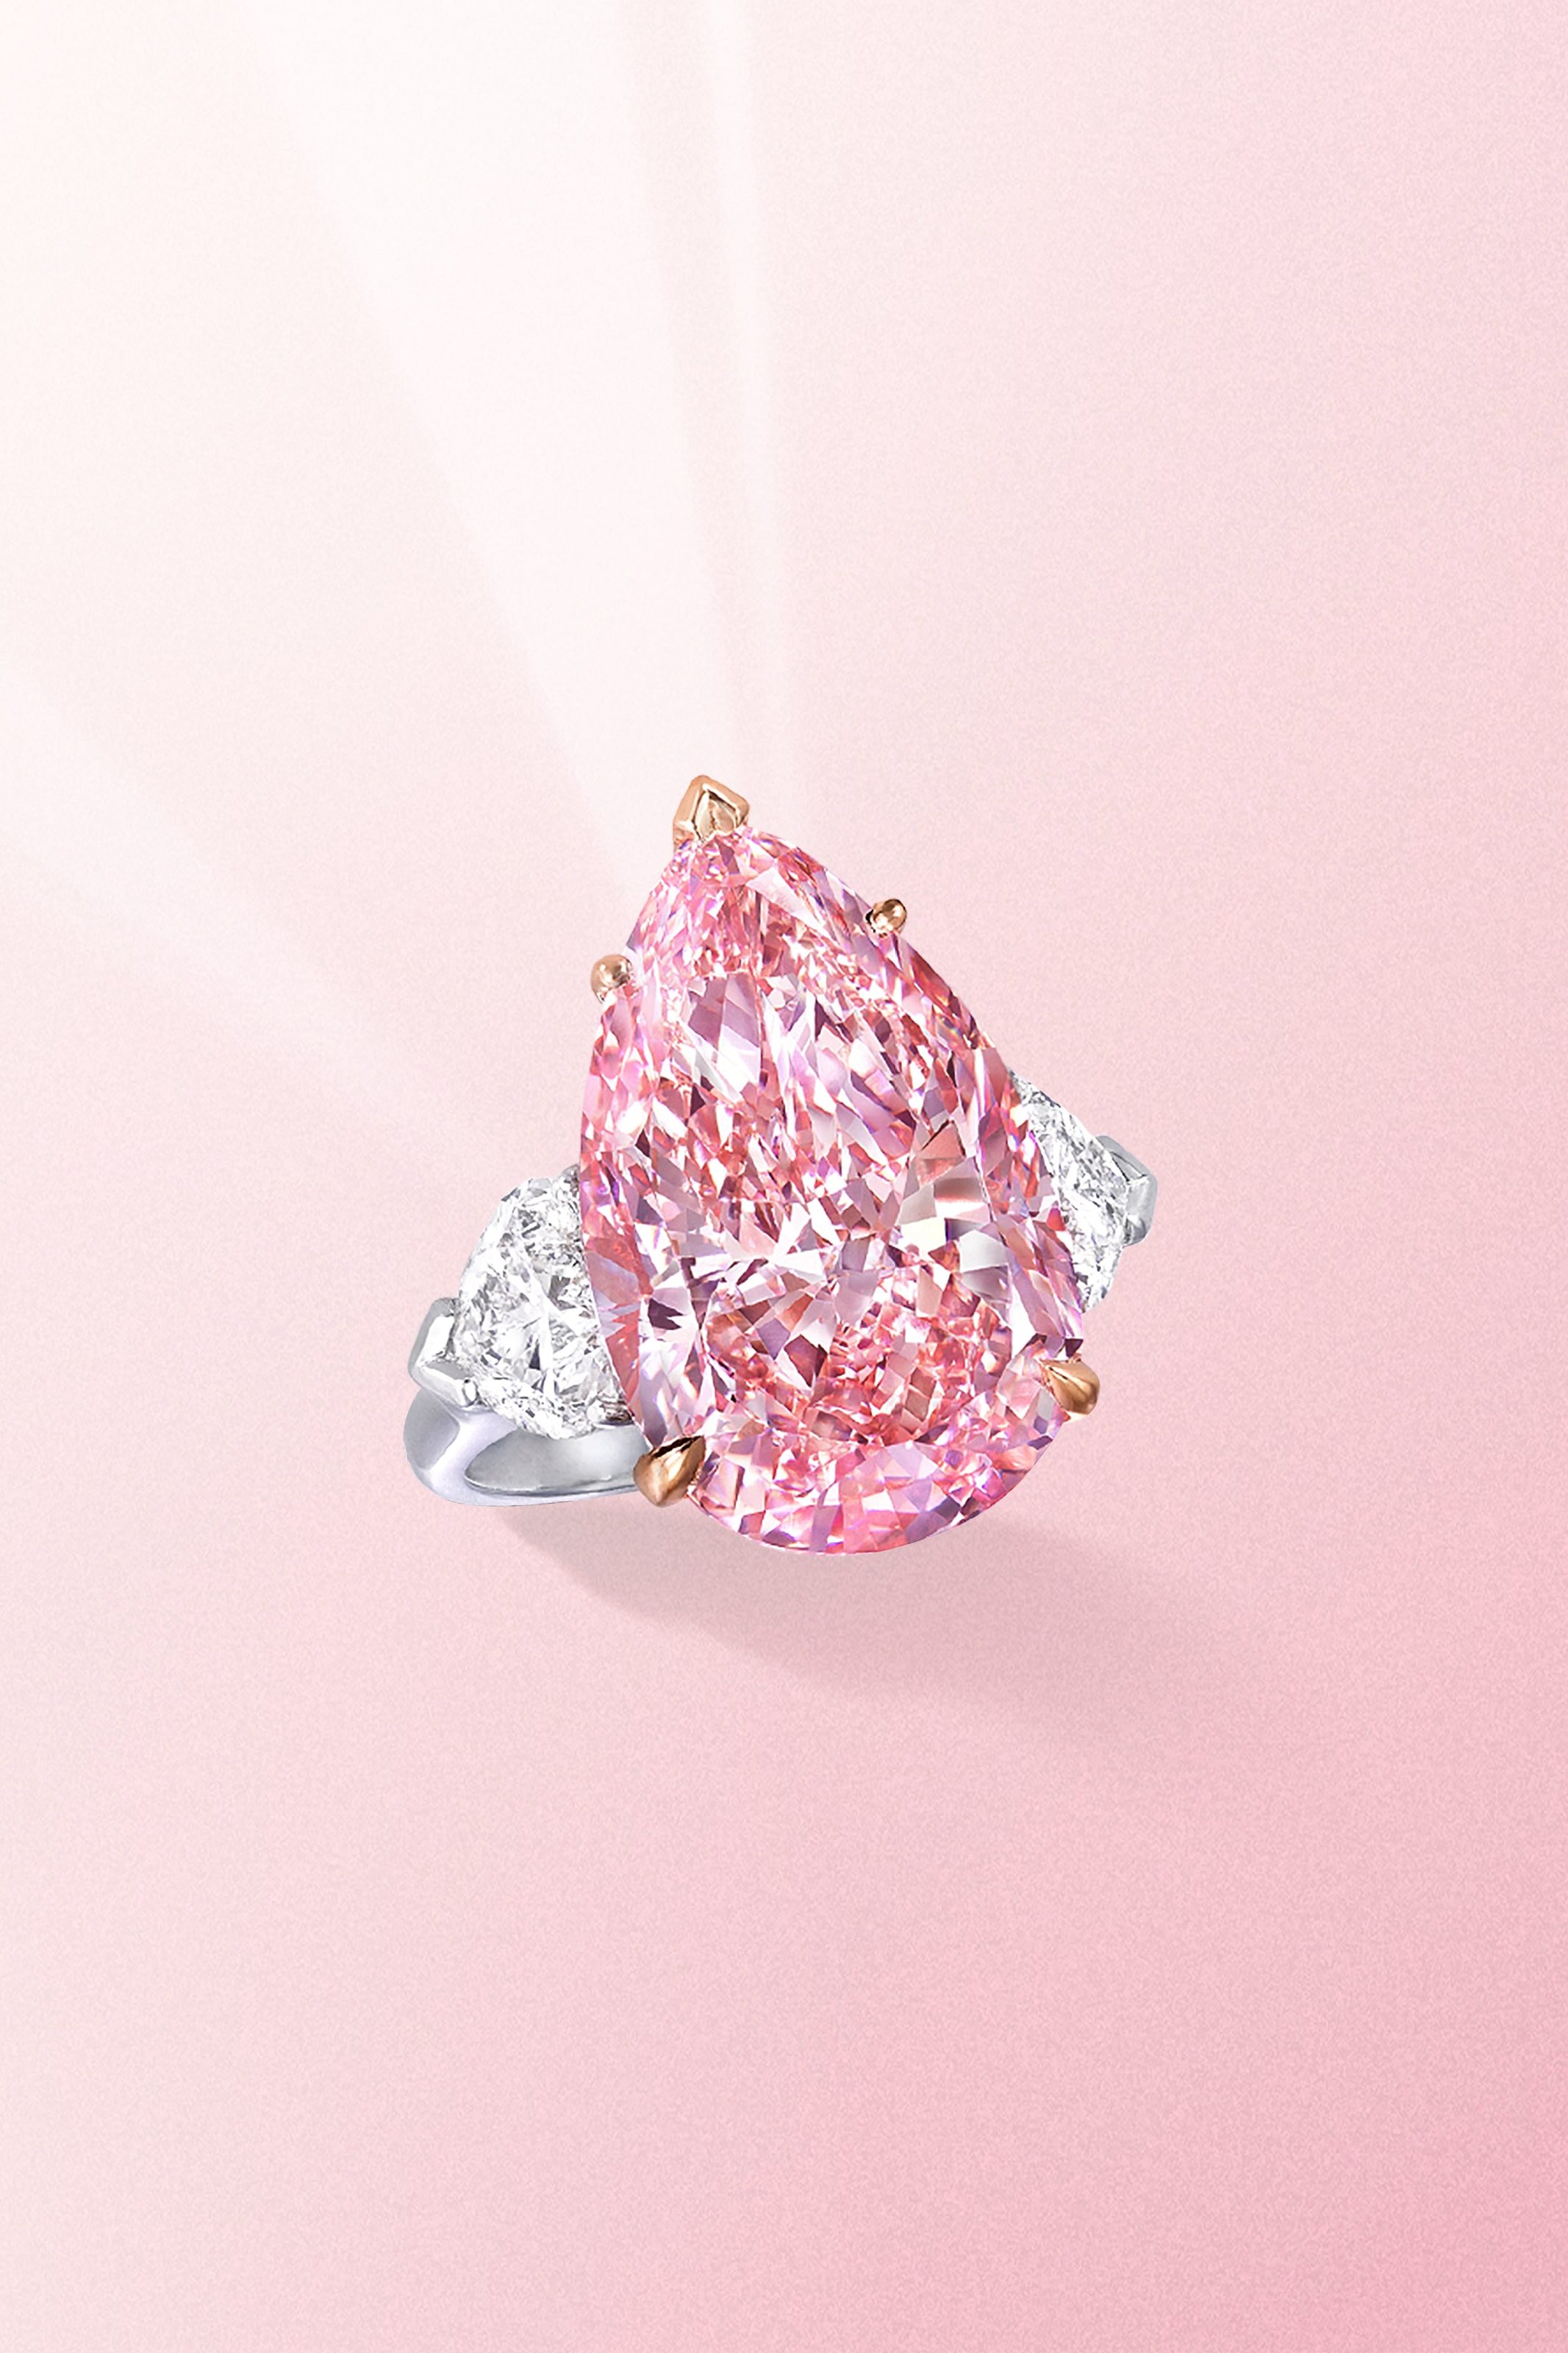 Fancy vivid pear shaped pink diamond ring with side white diamonds on a platinum band from Graff